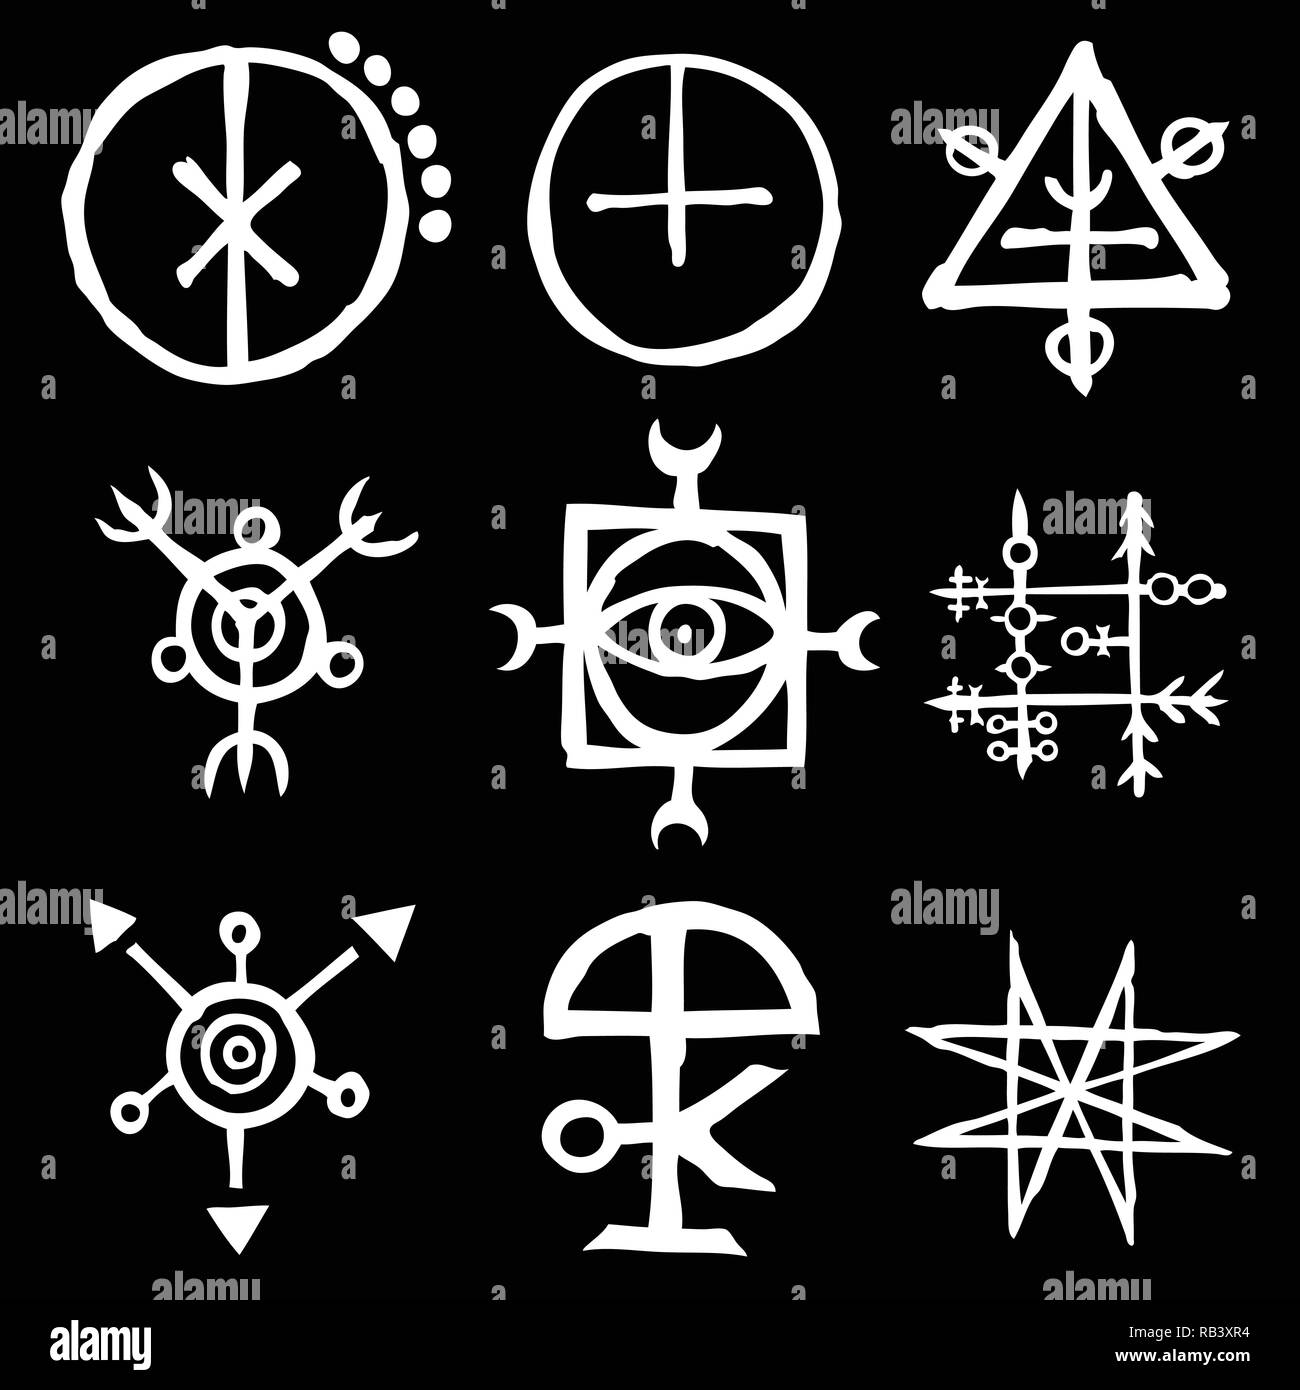 magic symbols and meanings